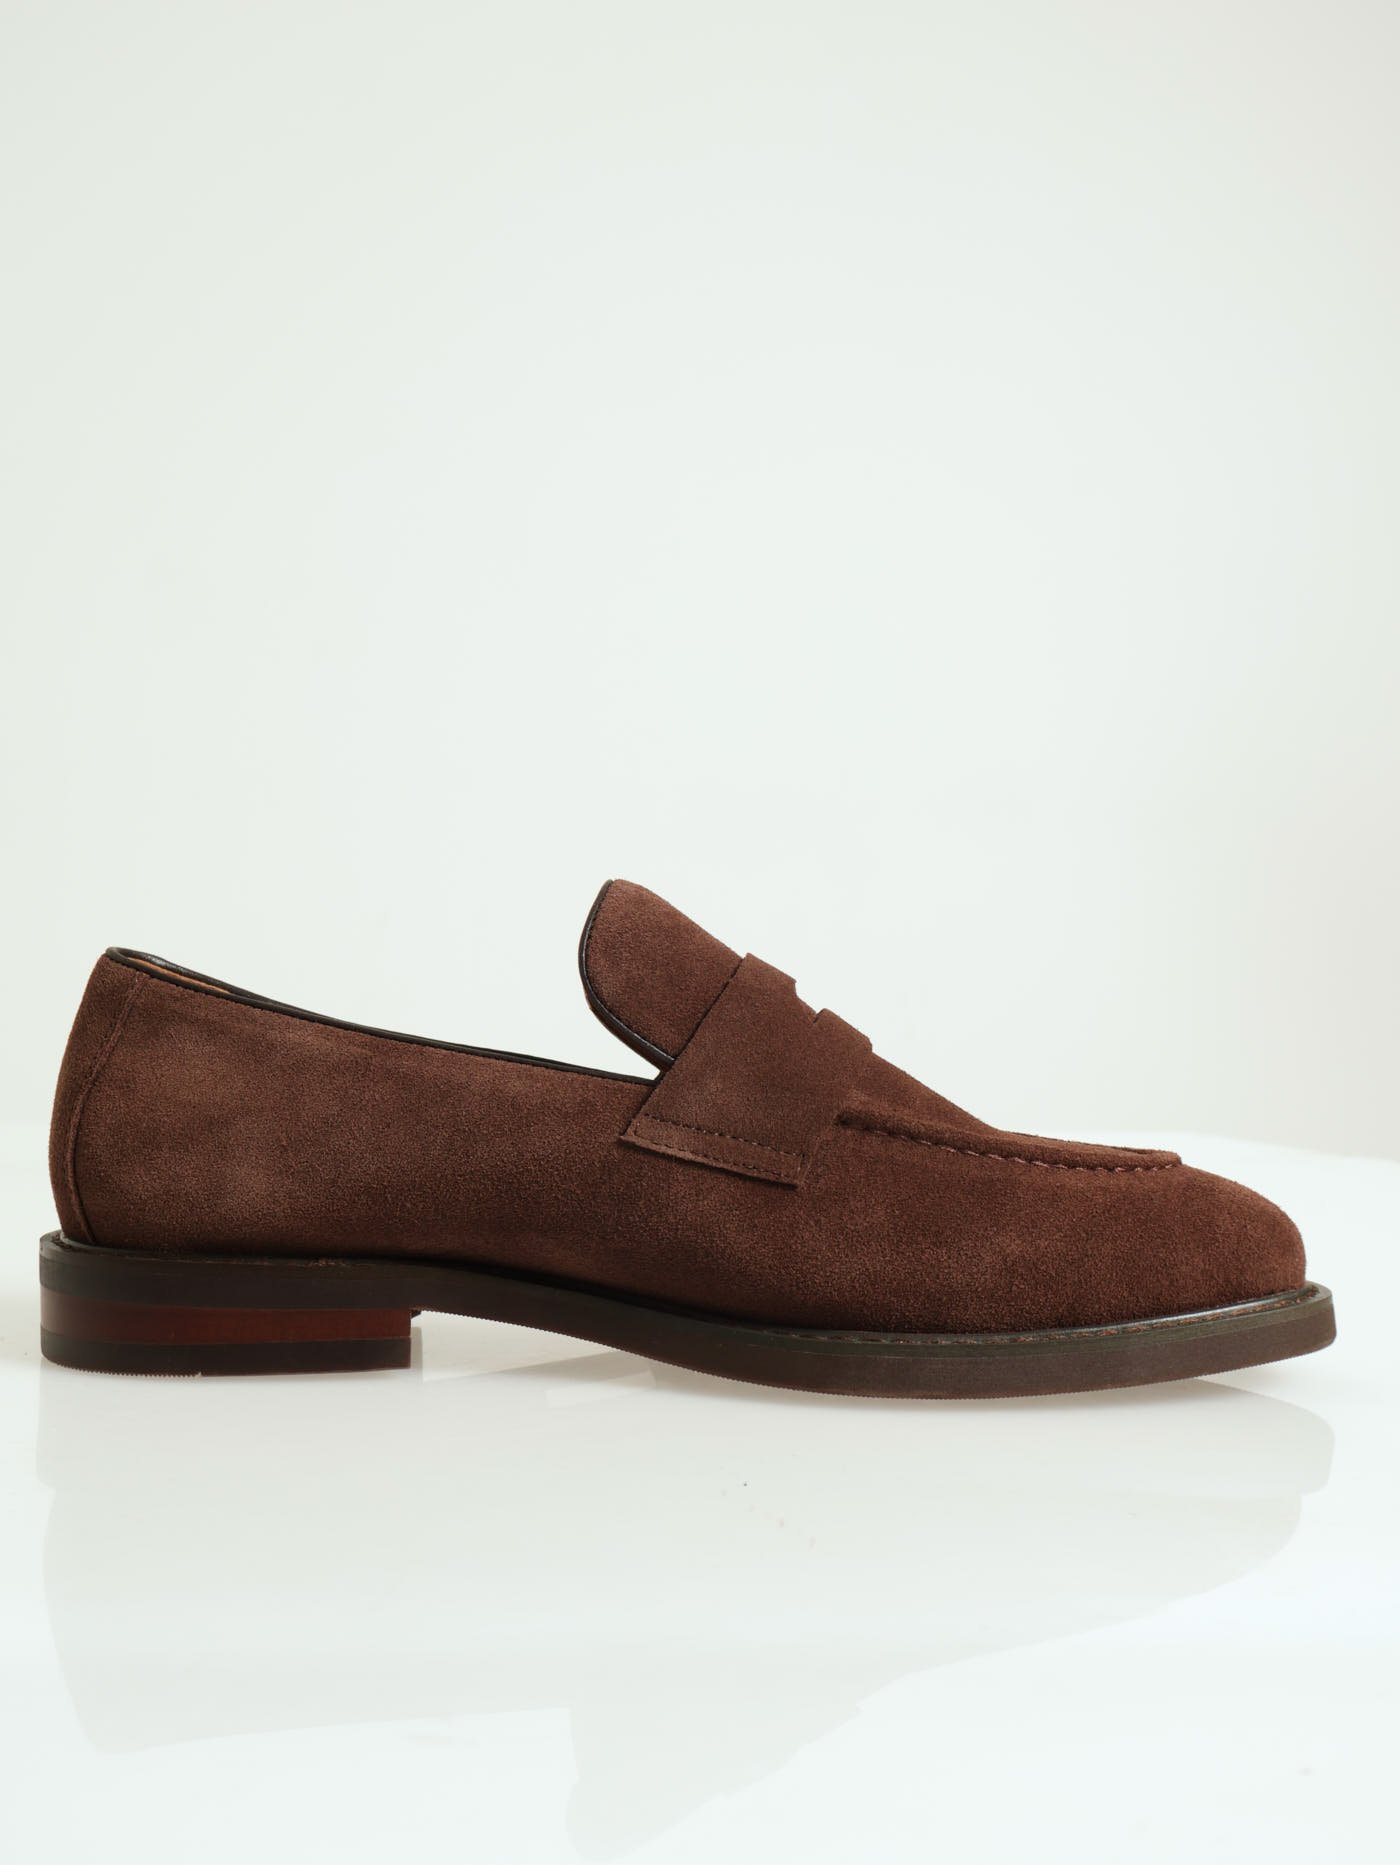 Smart Casual Suede Penny Mocc Loafer - Chocolate